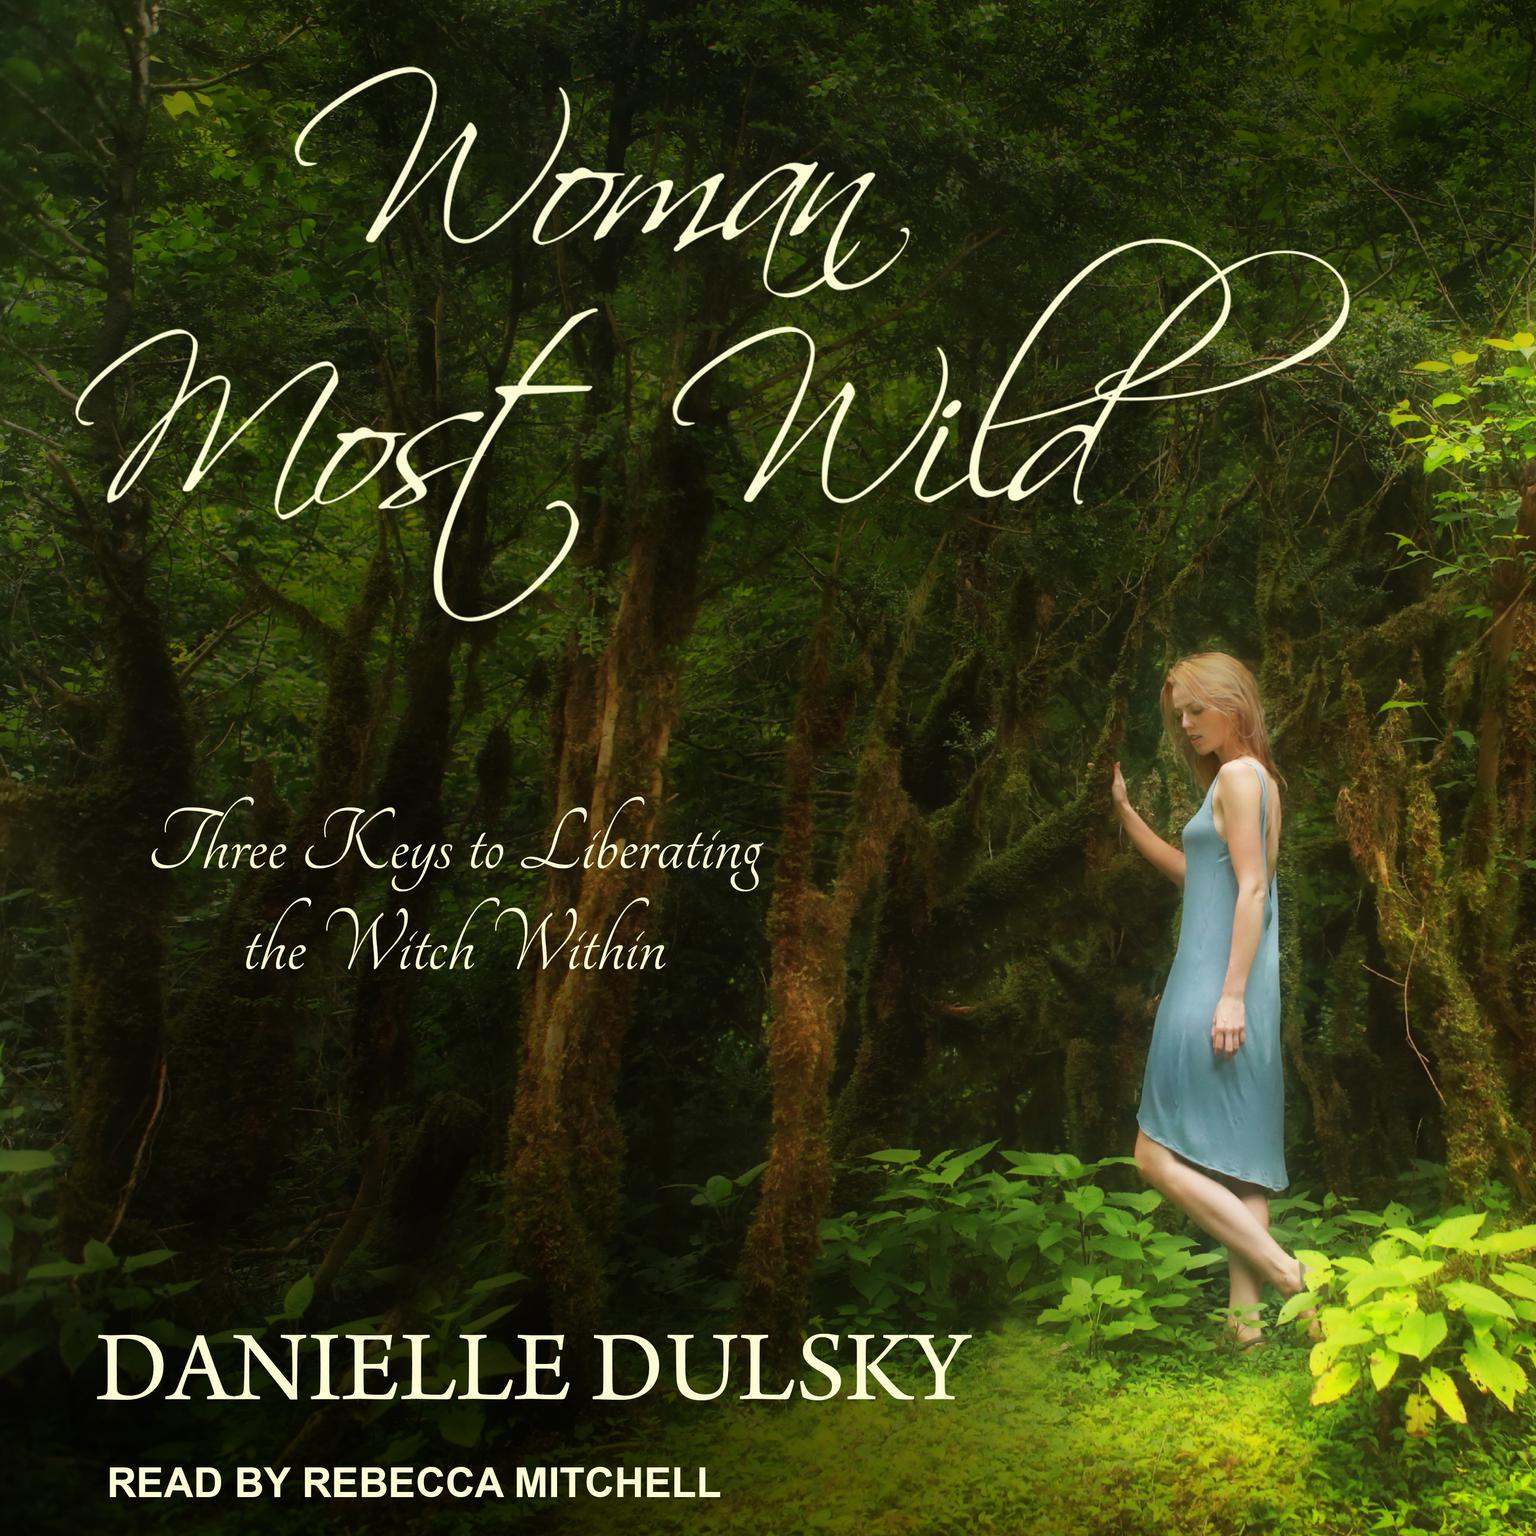 Woman Most Wild: Three Keys to Liberating the Witch Within Audiobook, by Danielle Dulsky